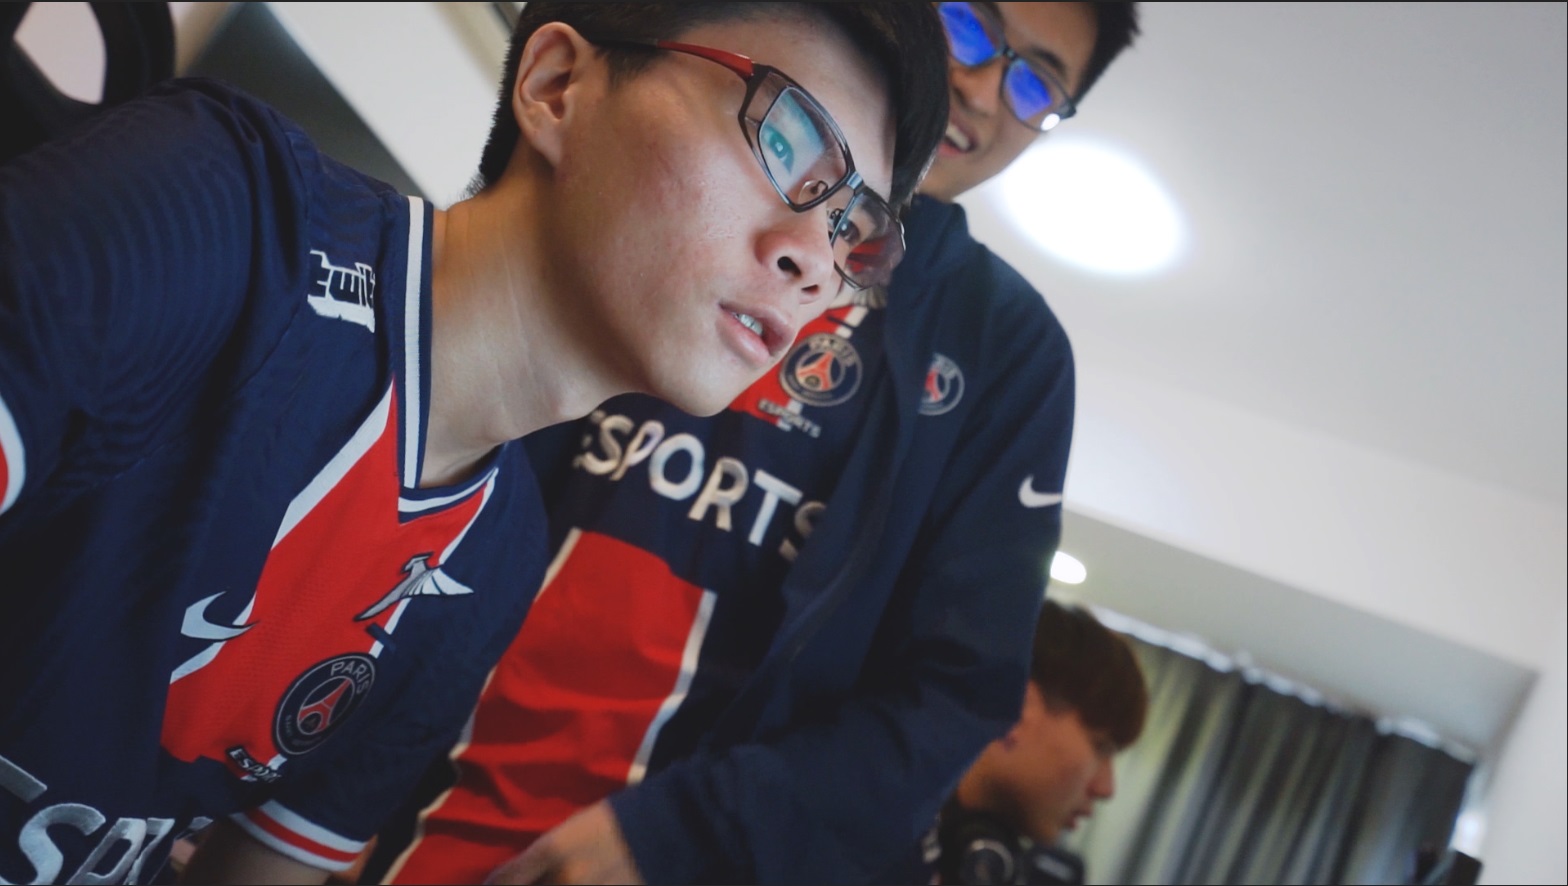 PSG Talon's Unified has his sights set on Worlds after MSI health scare